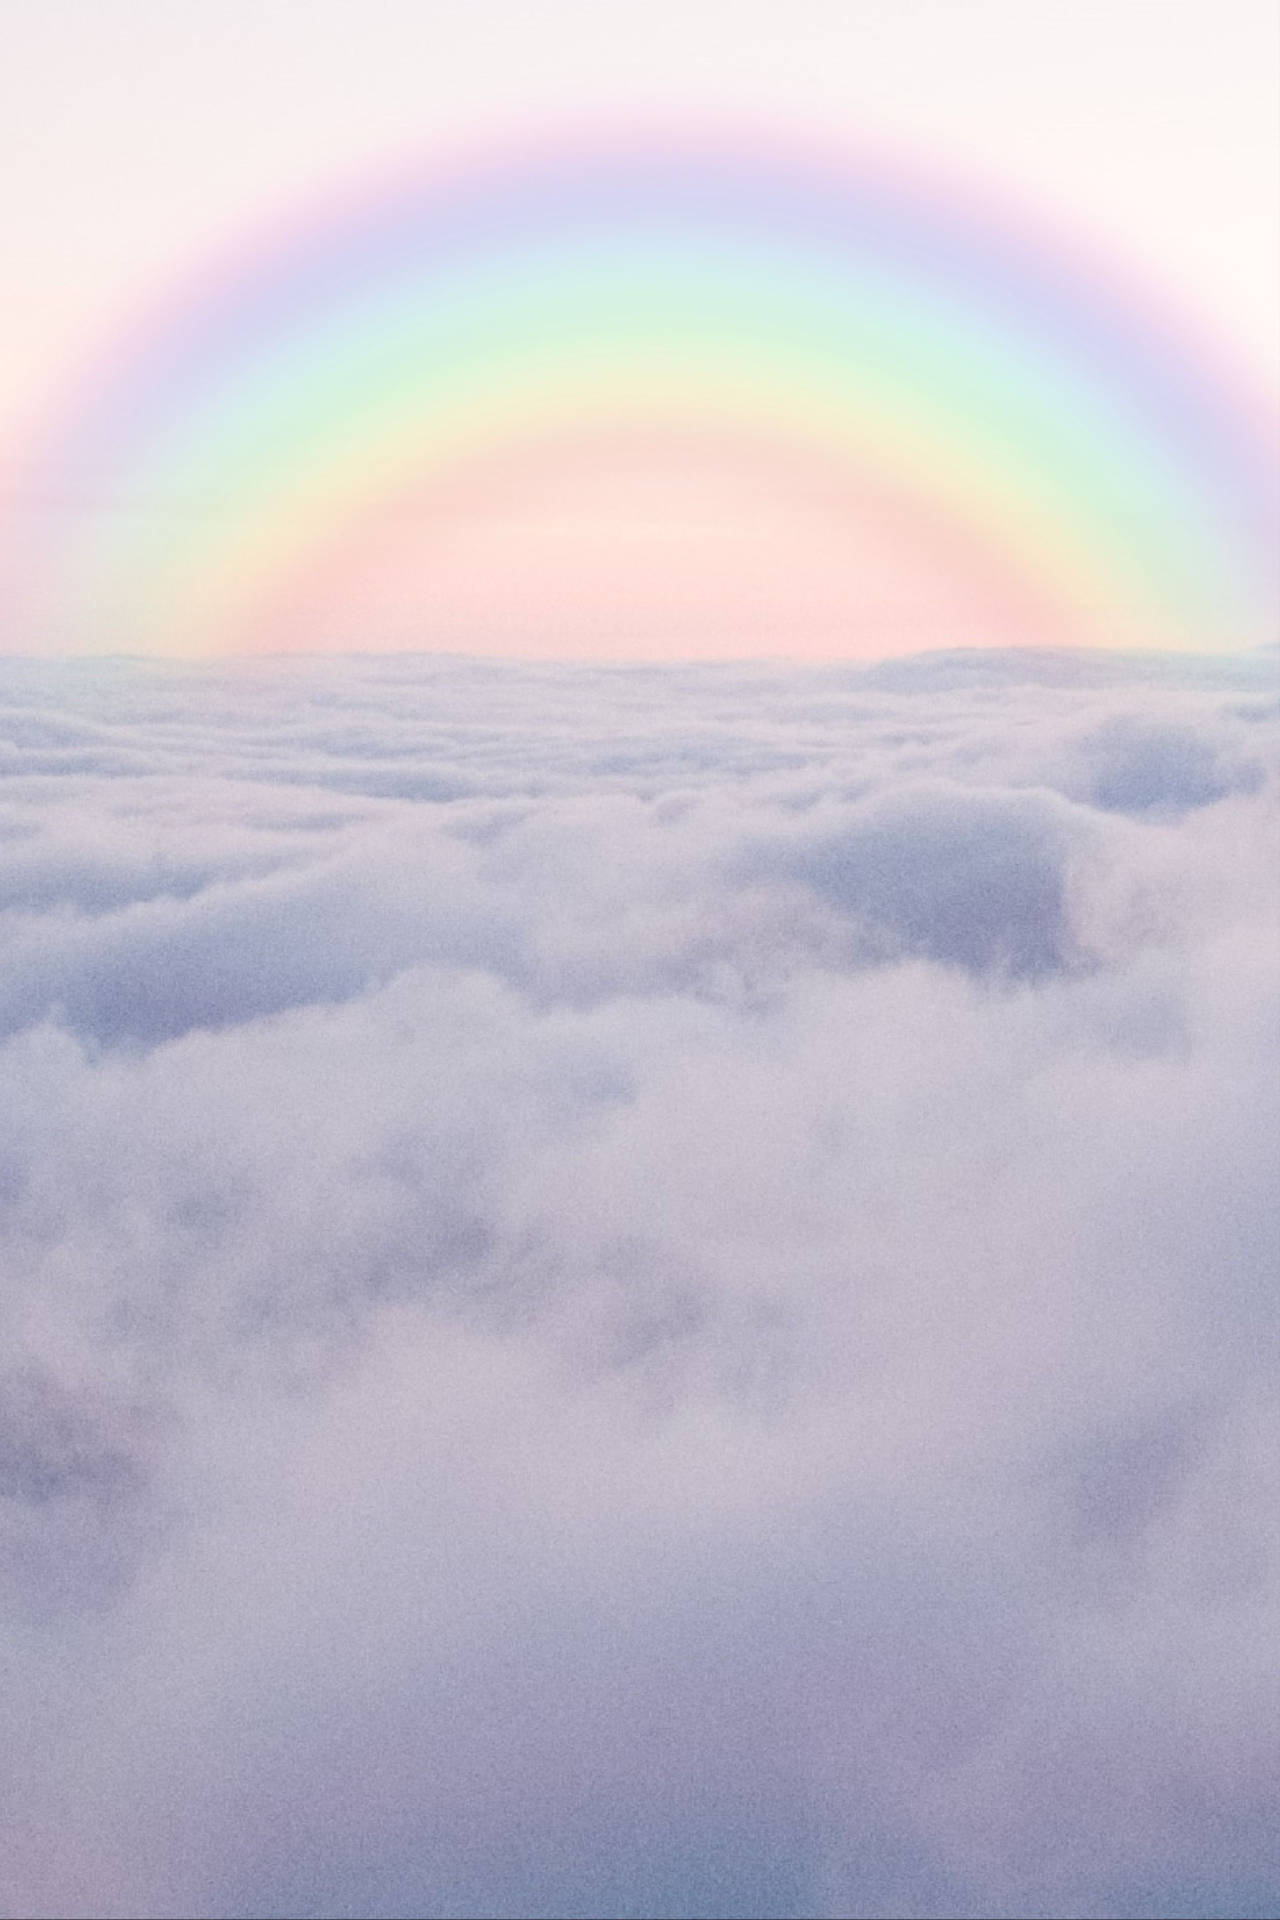 Sea Of Clouds With Pastel Rainbow Wallpaper